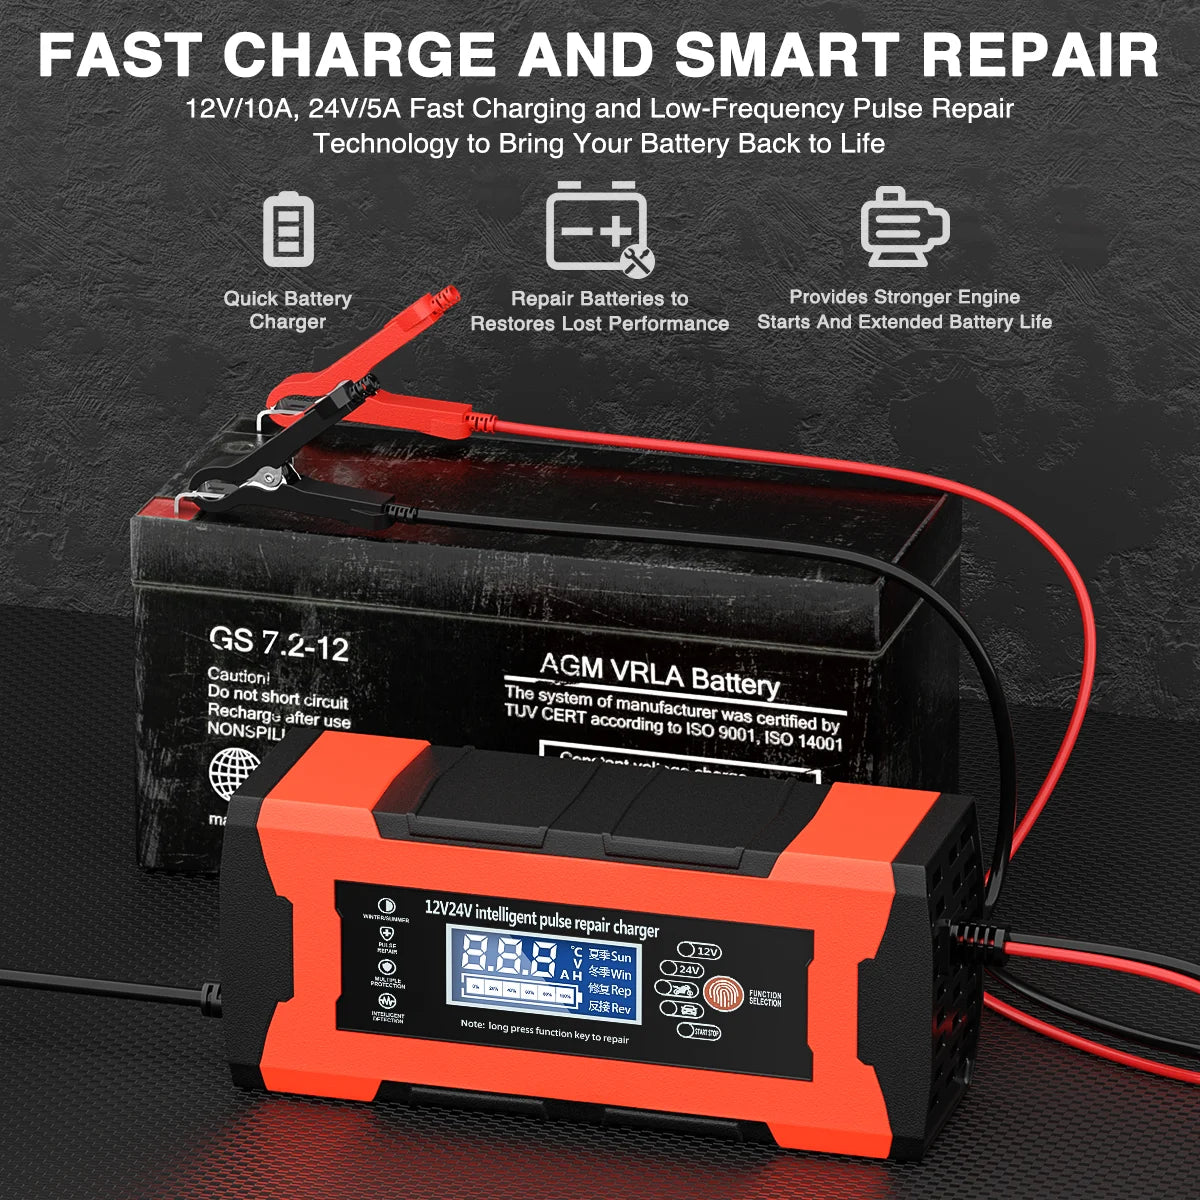 10-Amp Car Battery Charger, 12V 24V Automatic Smart Battery Maintainer Trickle Charger, Battery Charger Battery Desulfator with Temp Compensation for Car Truck Motorcycle Lawn Mower Lead Acid Battery